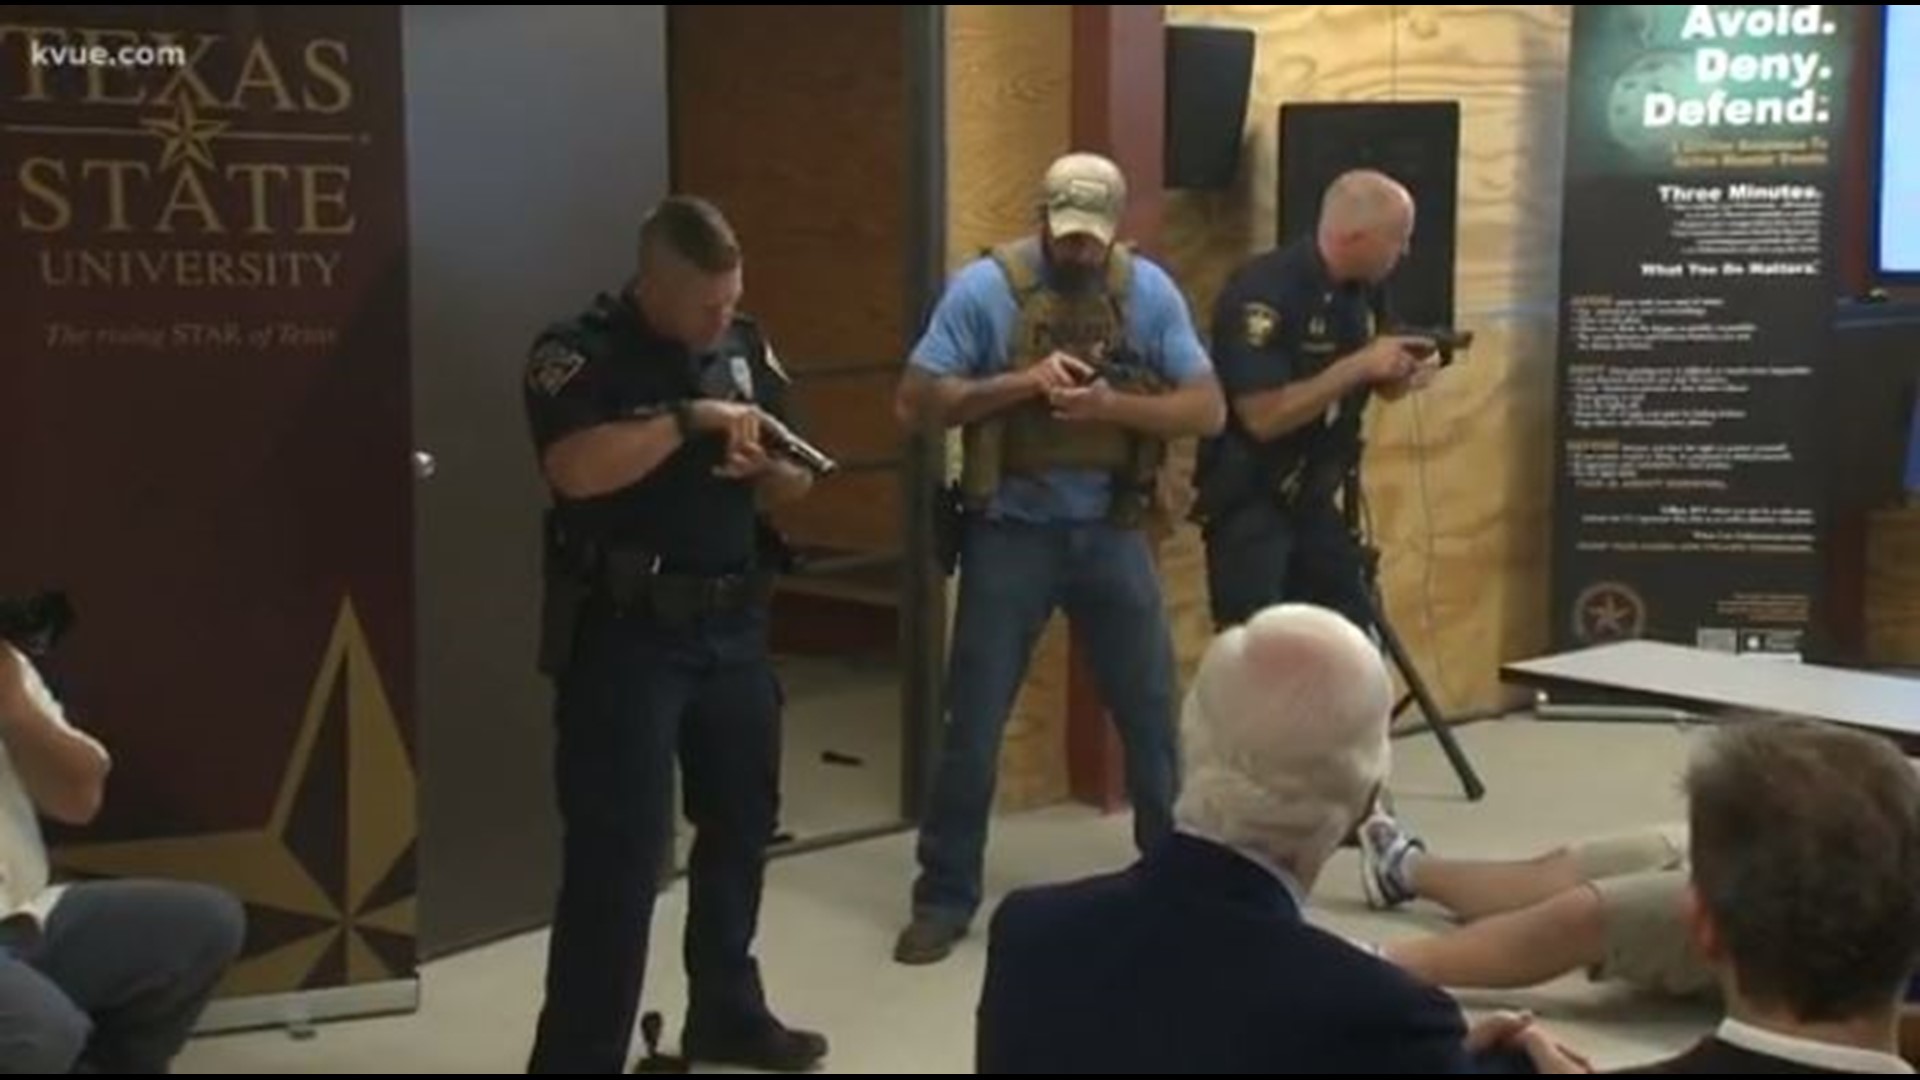 Here's a look at some of the core concepts of the active shooter training.